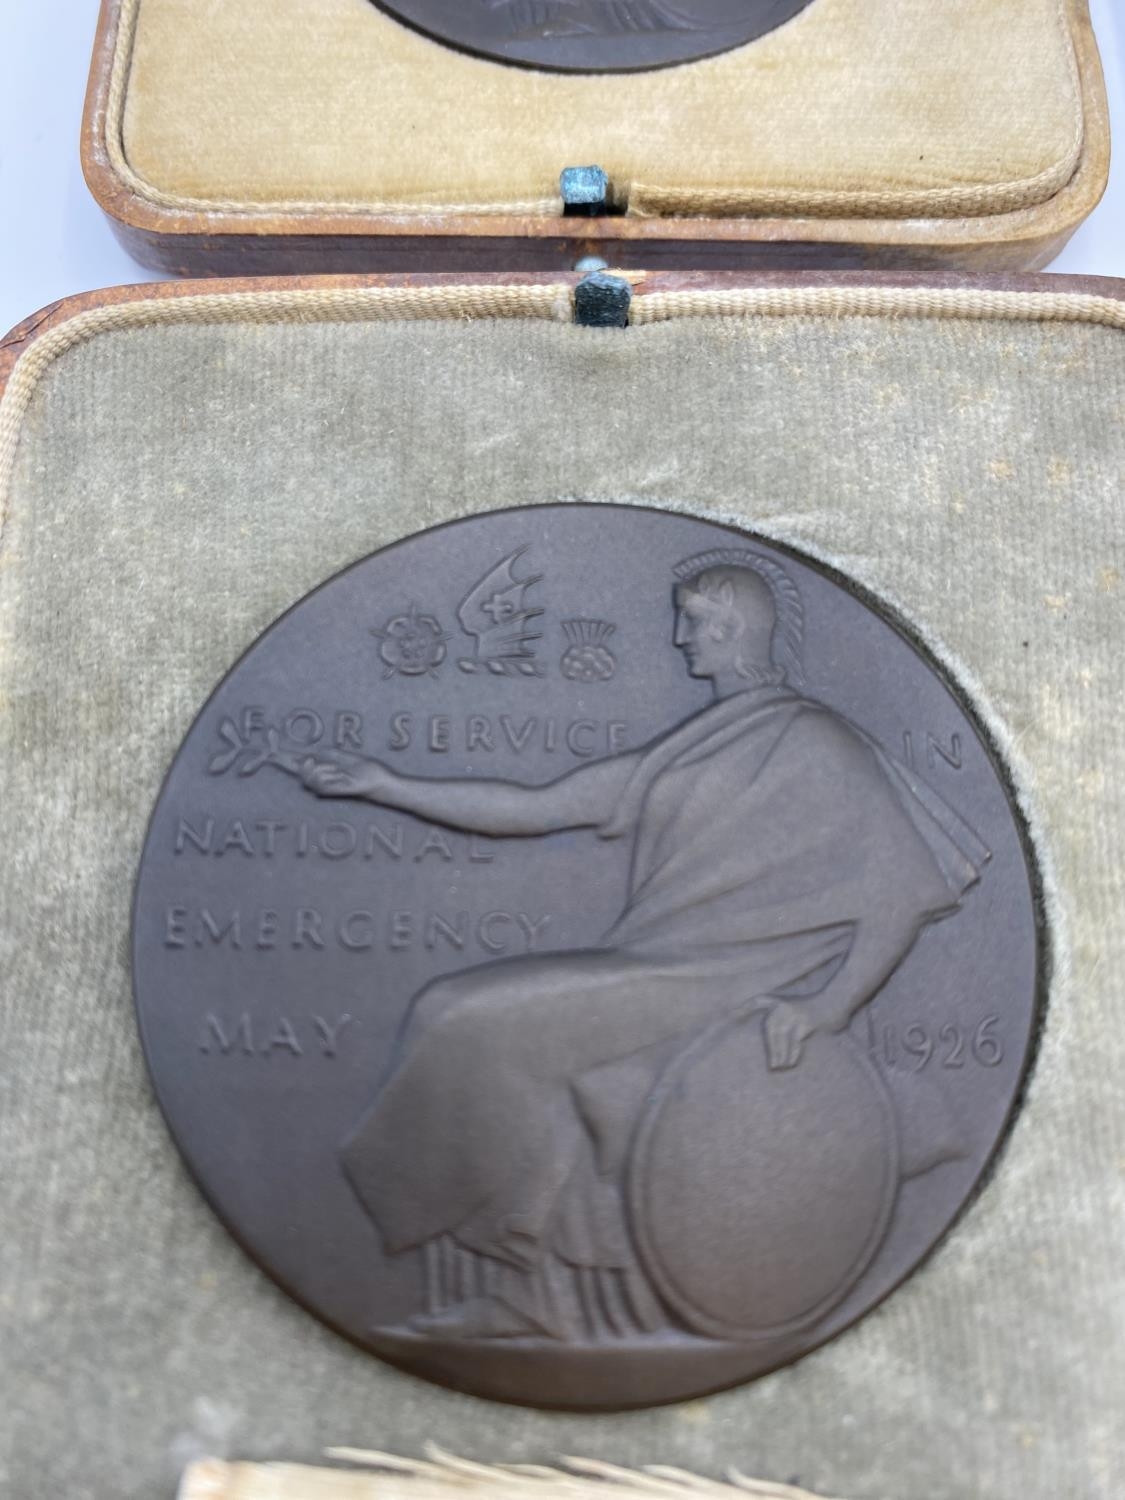 Two bronze medallions 'for service in national emergency' May 1926 London, Midland, Scottish, - Image 2 of 10